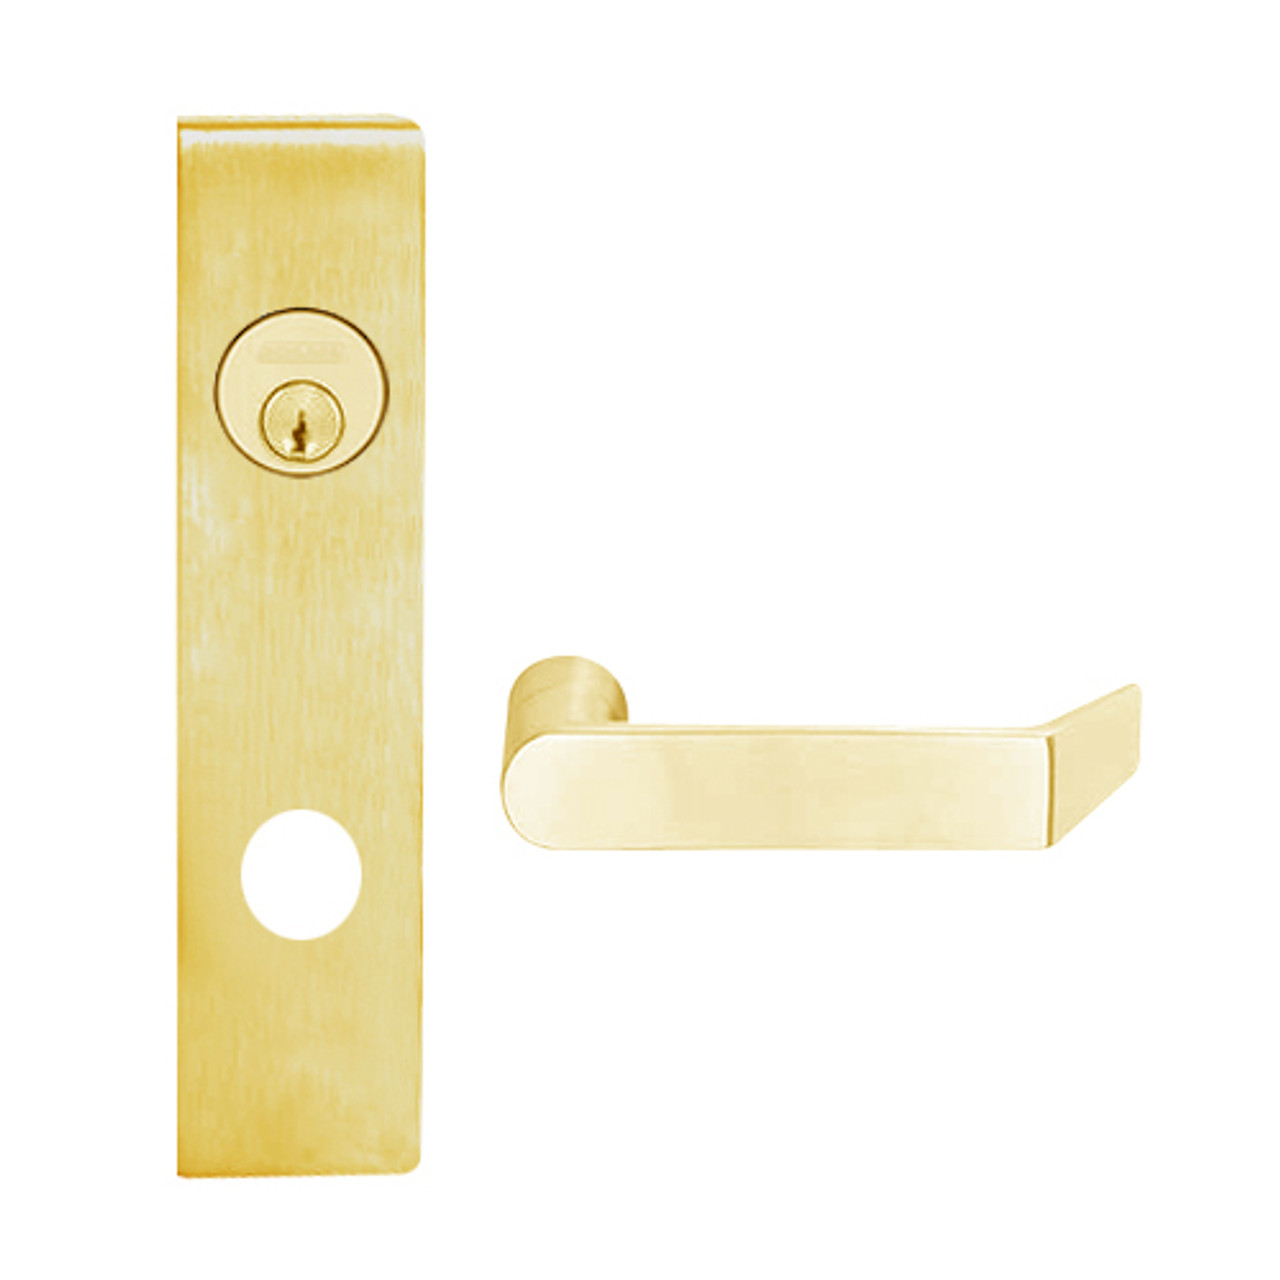 L9456L-06L-605 Schlage L Series Less Cylinder Corridor with Deadbolt Commercial Mortise Lock with 06 Cast Lever Design in Bright Brass